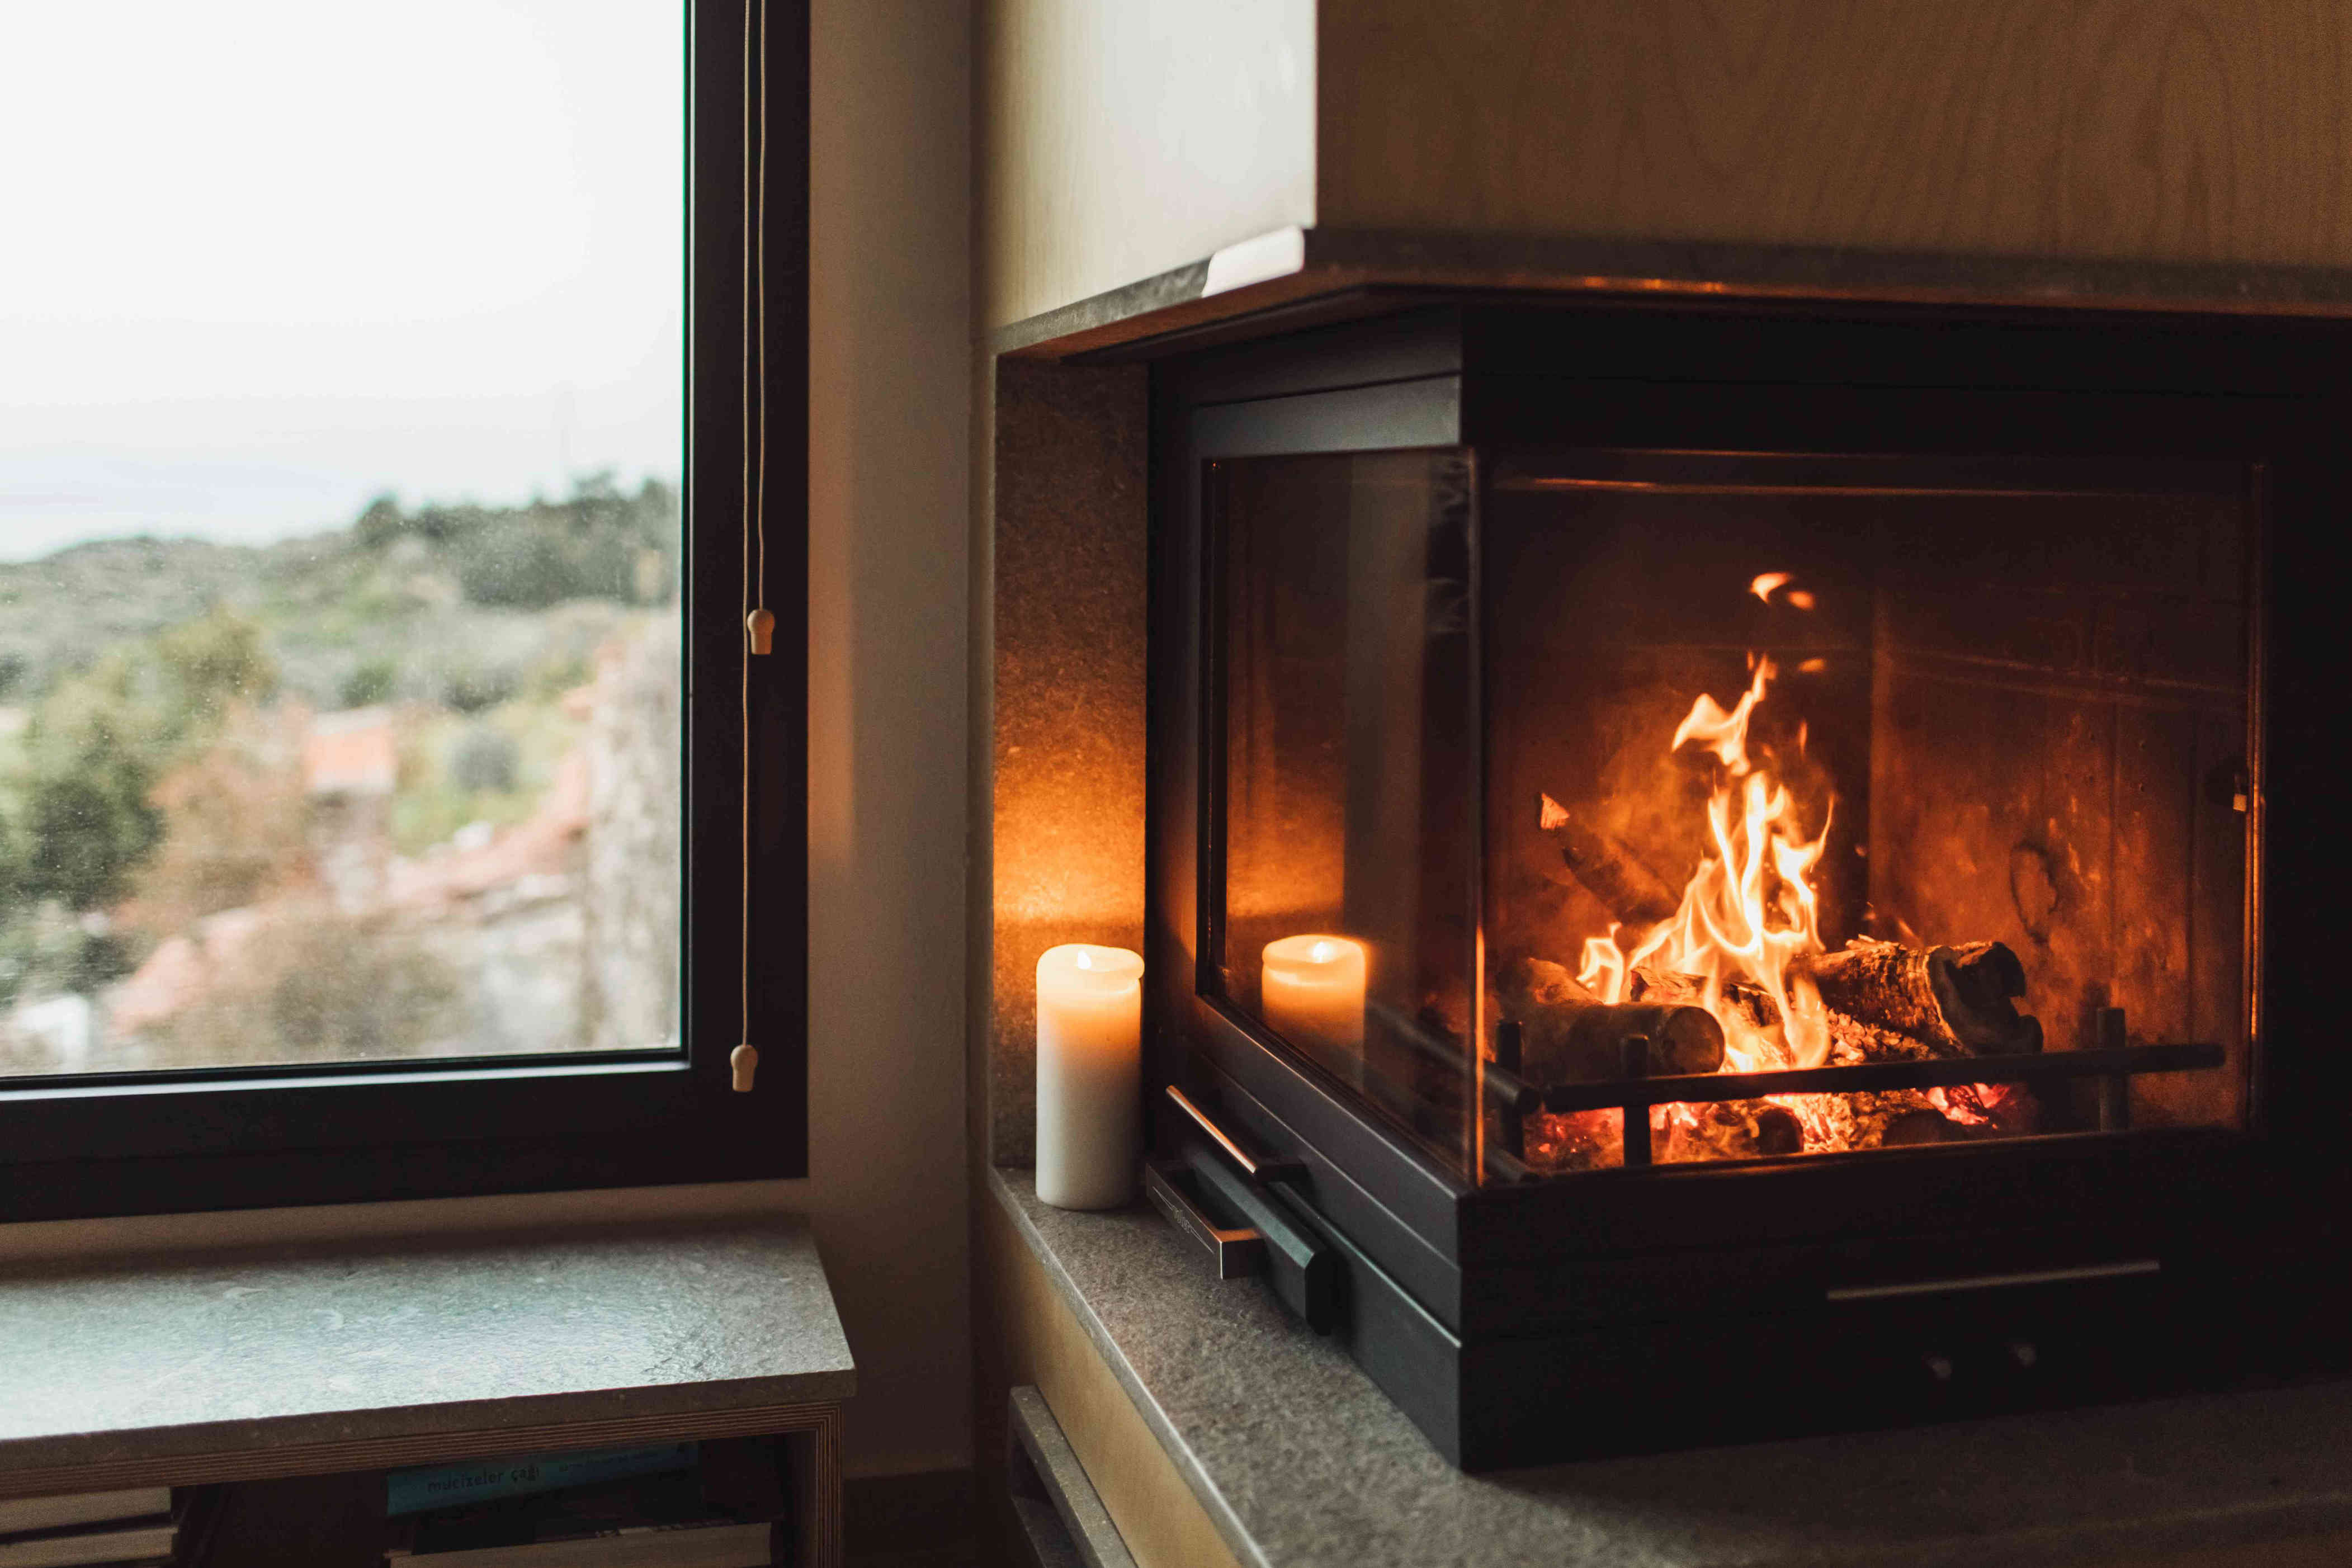 How To Clean A Glass Fireplace In Any Room